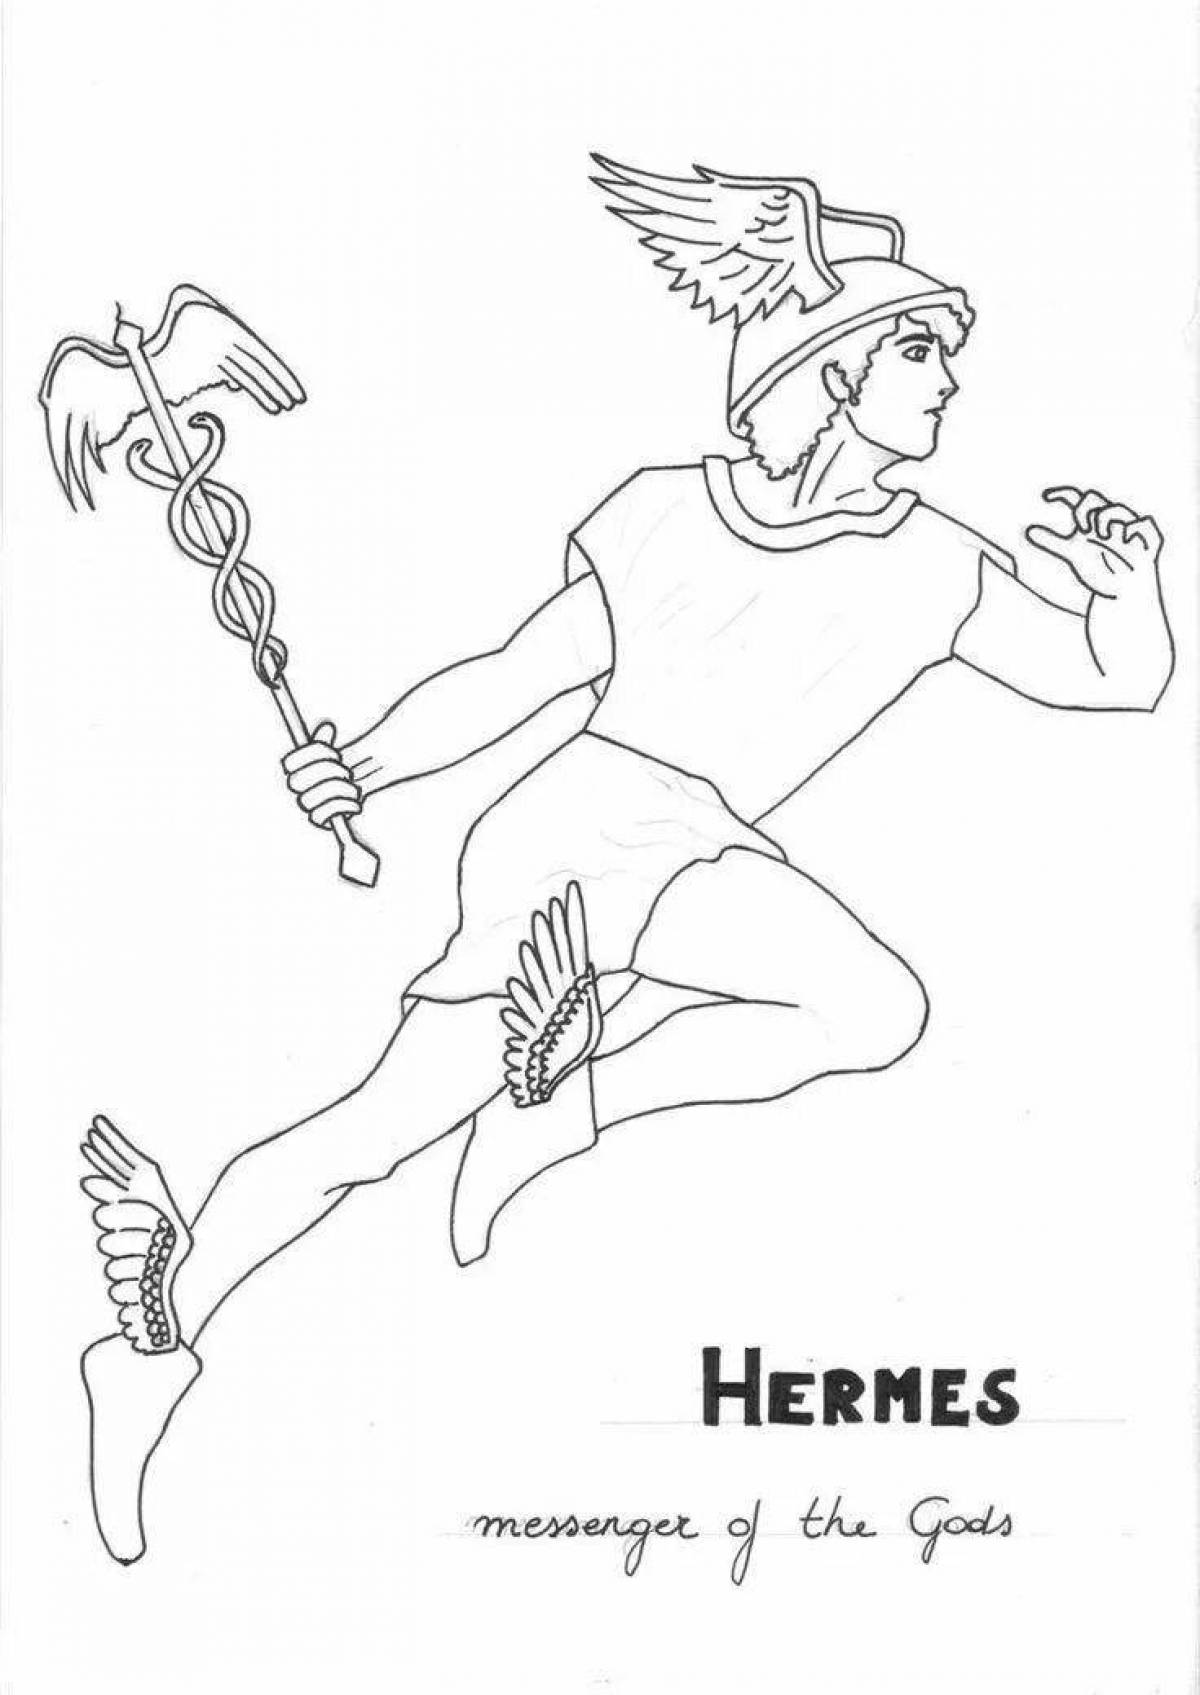 Great coloring of ancient Greek myths